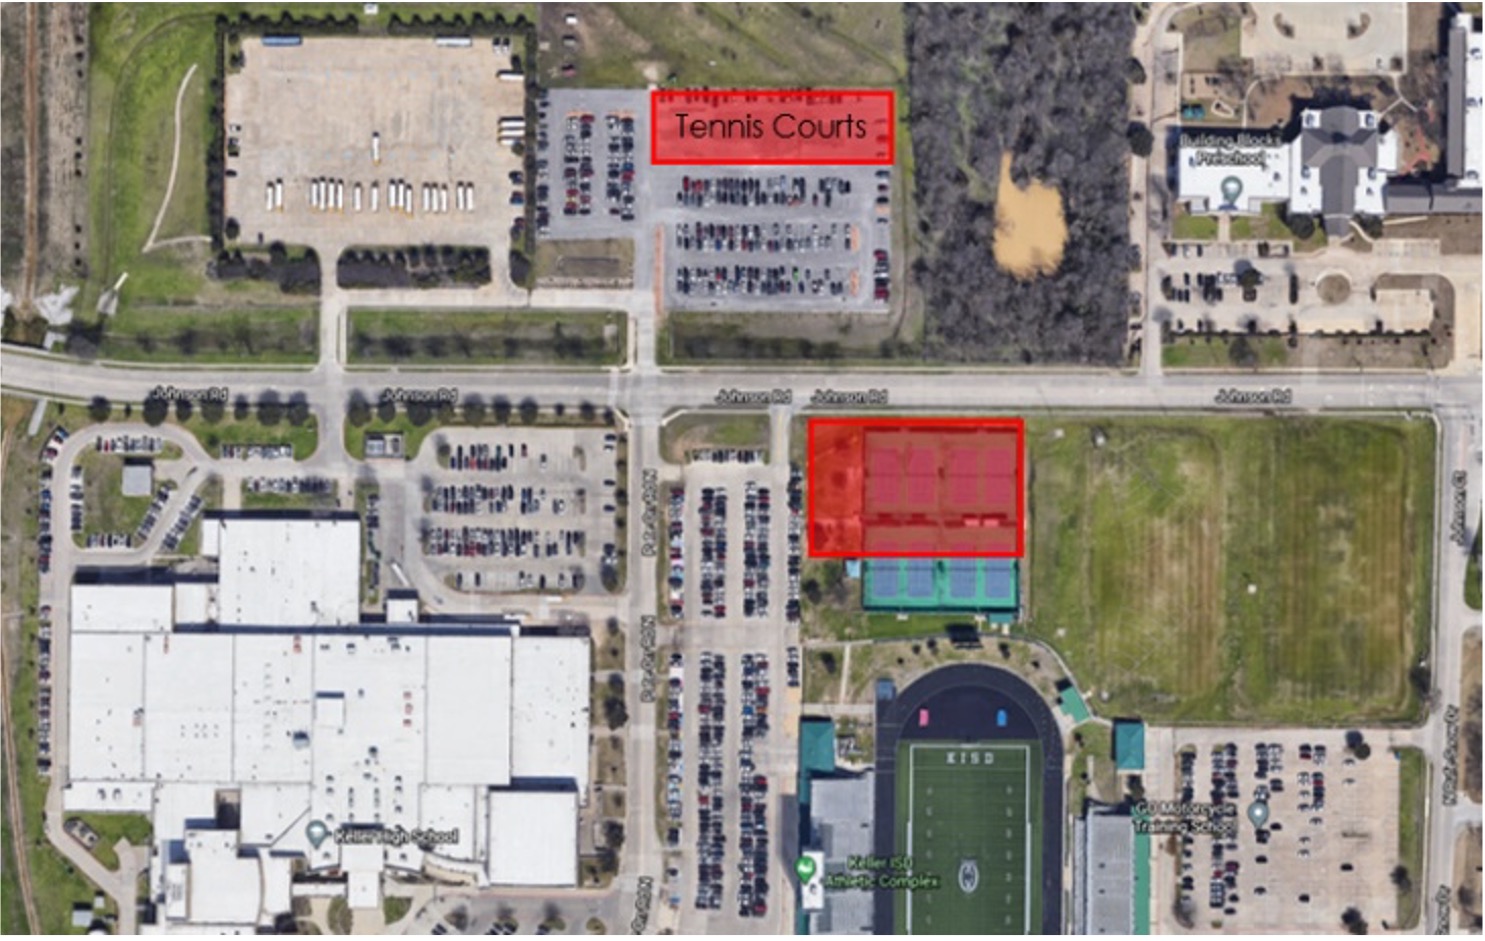 Site plan for KHS Indoor Extracurricular facility